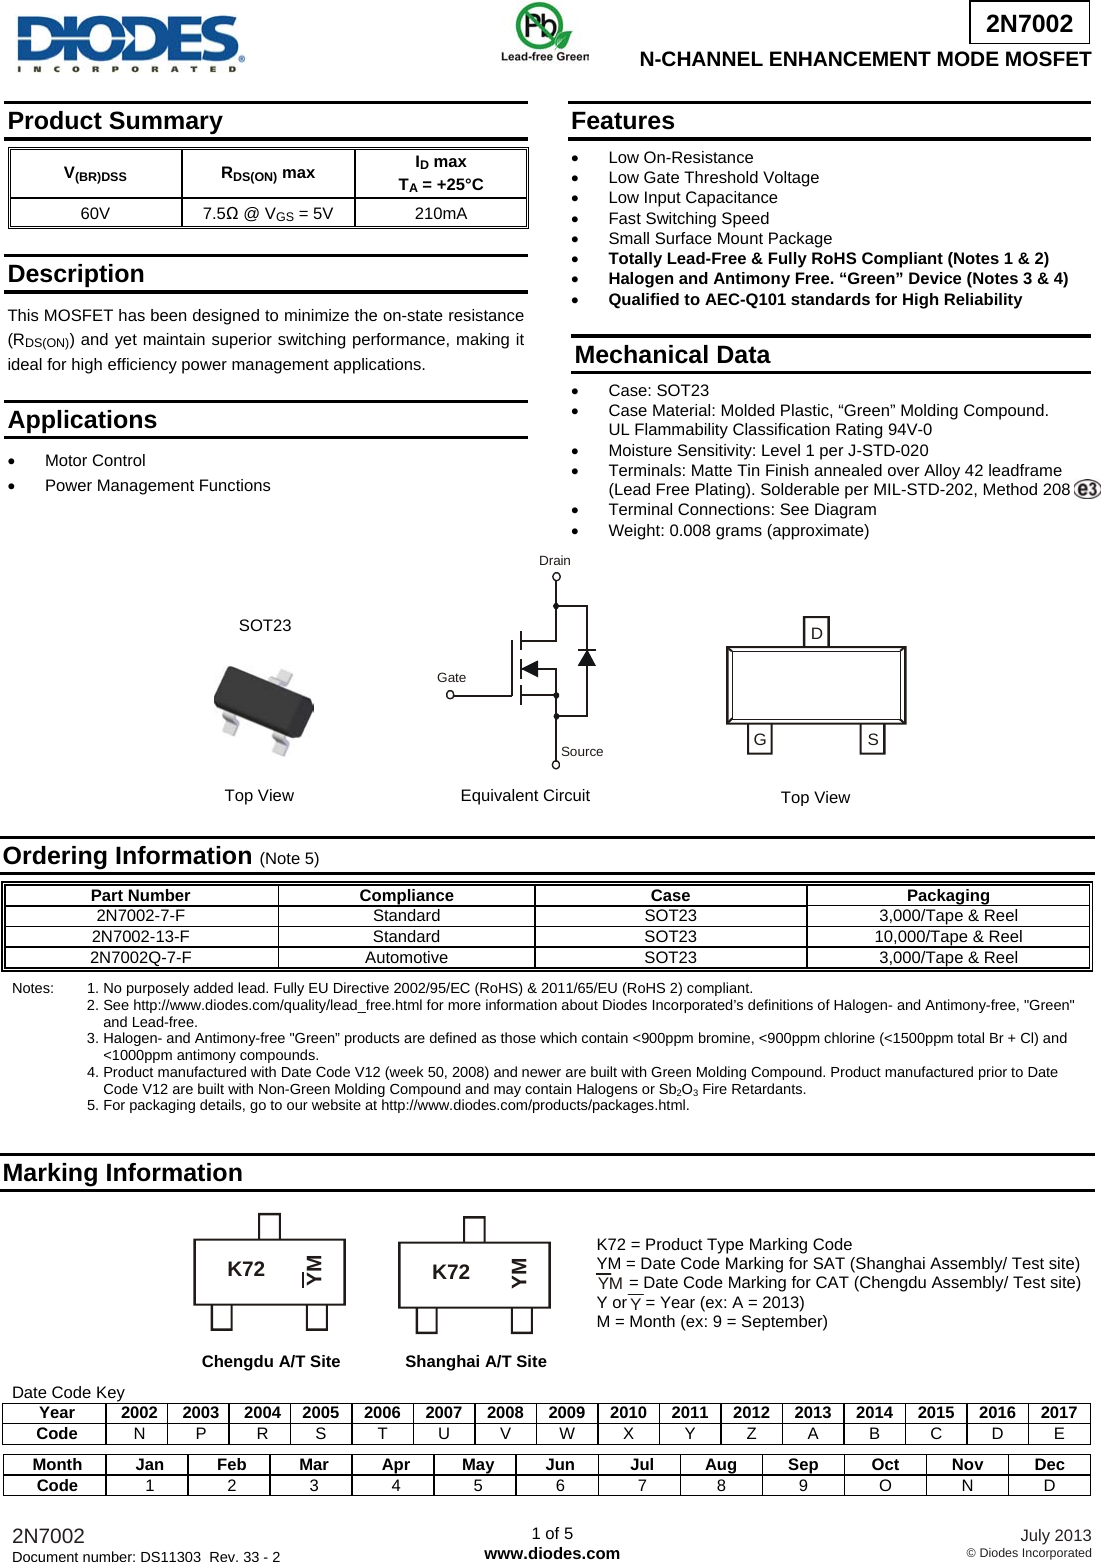 Page 1 of 6 - 2N7002 - Datasheet. Www.s-manuals.com. Diodes